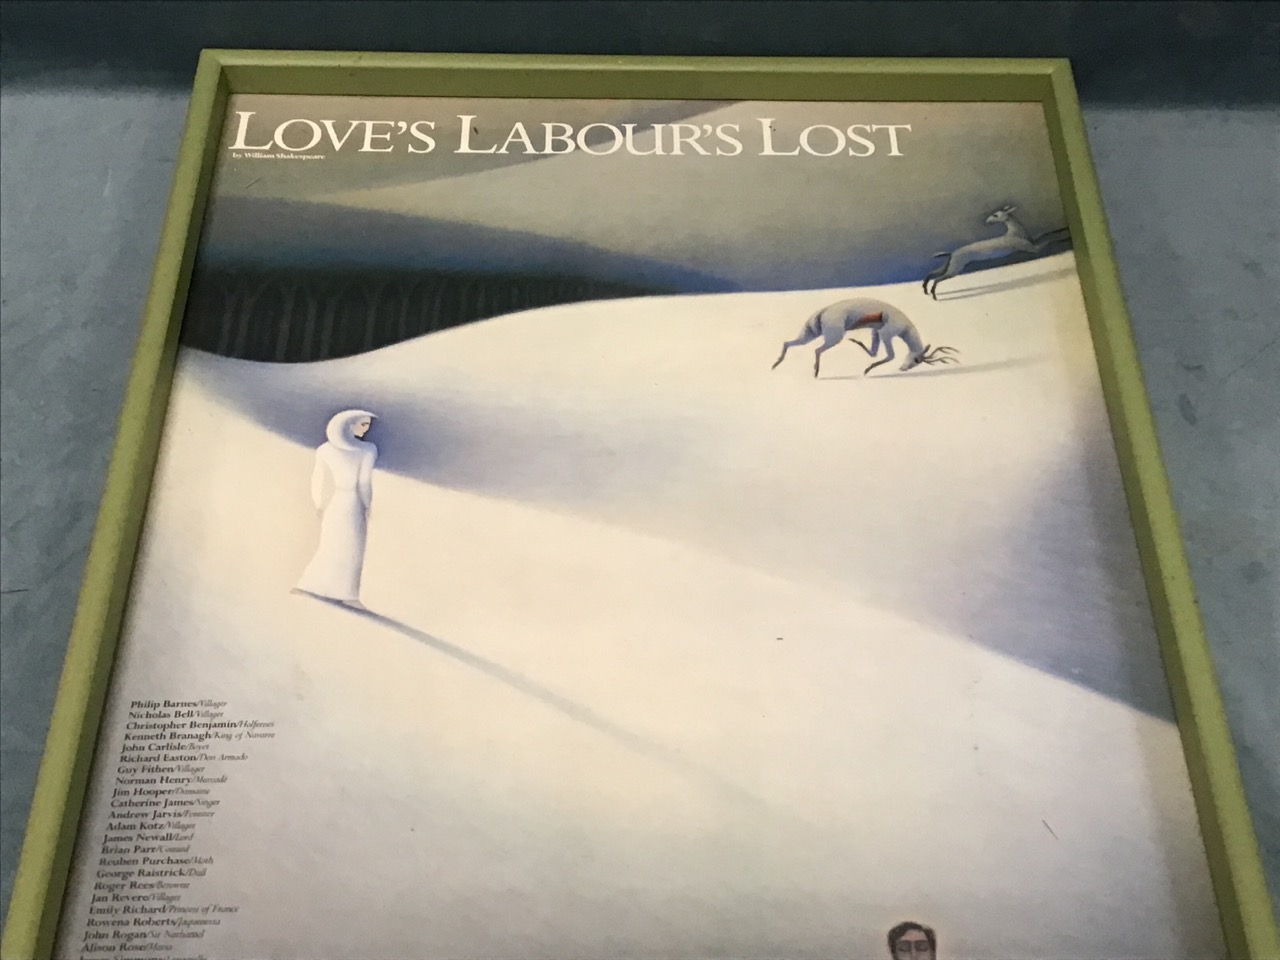 A 1985 RSC poster from Loves Labours Lost in painted frame. (20.5in x 28.25in) - Image 3 of 3